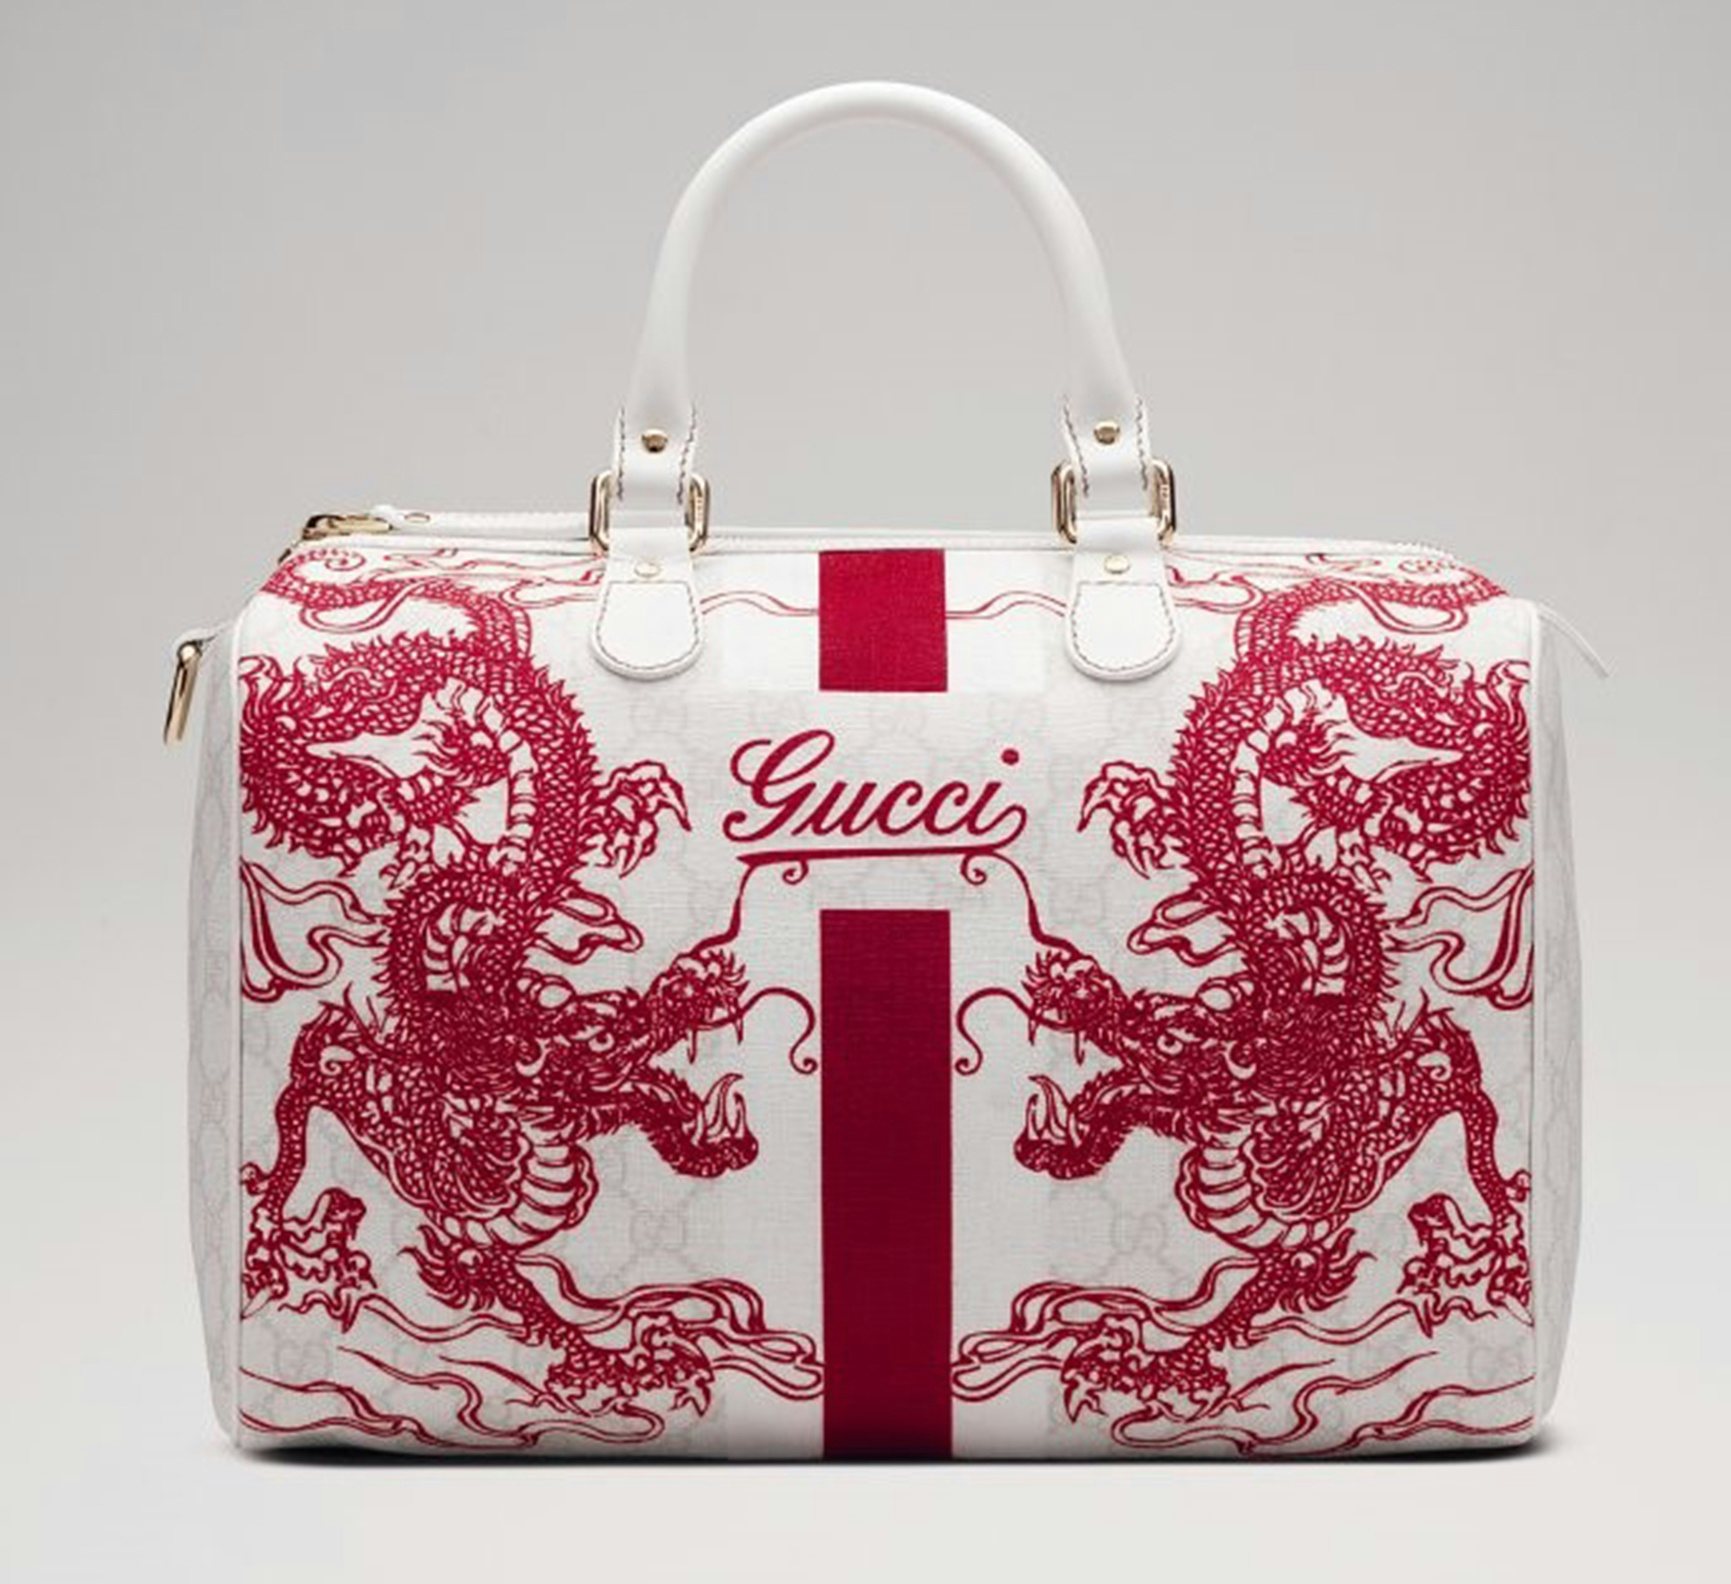 In 2009, Gucci released 200 limited edition "Shanghai Dragon” bags to celebrate its flagship store opening in Shanghai.